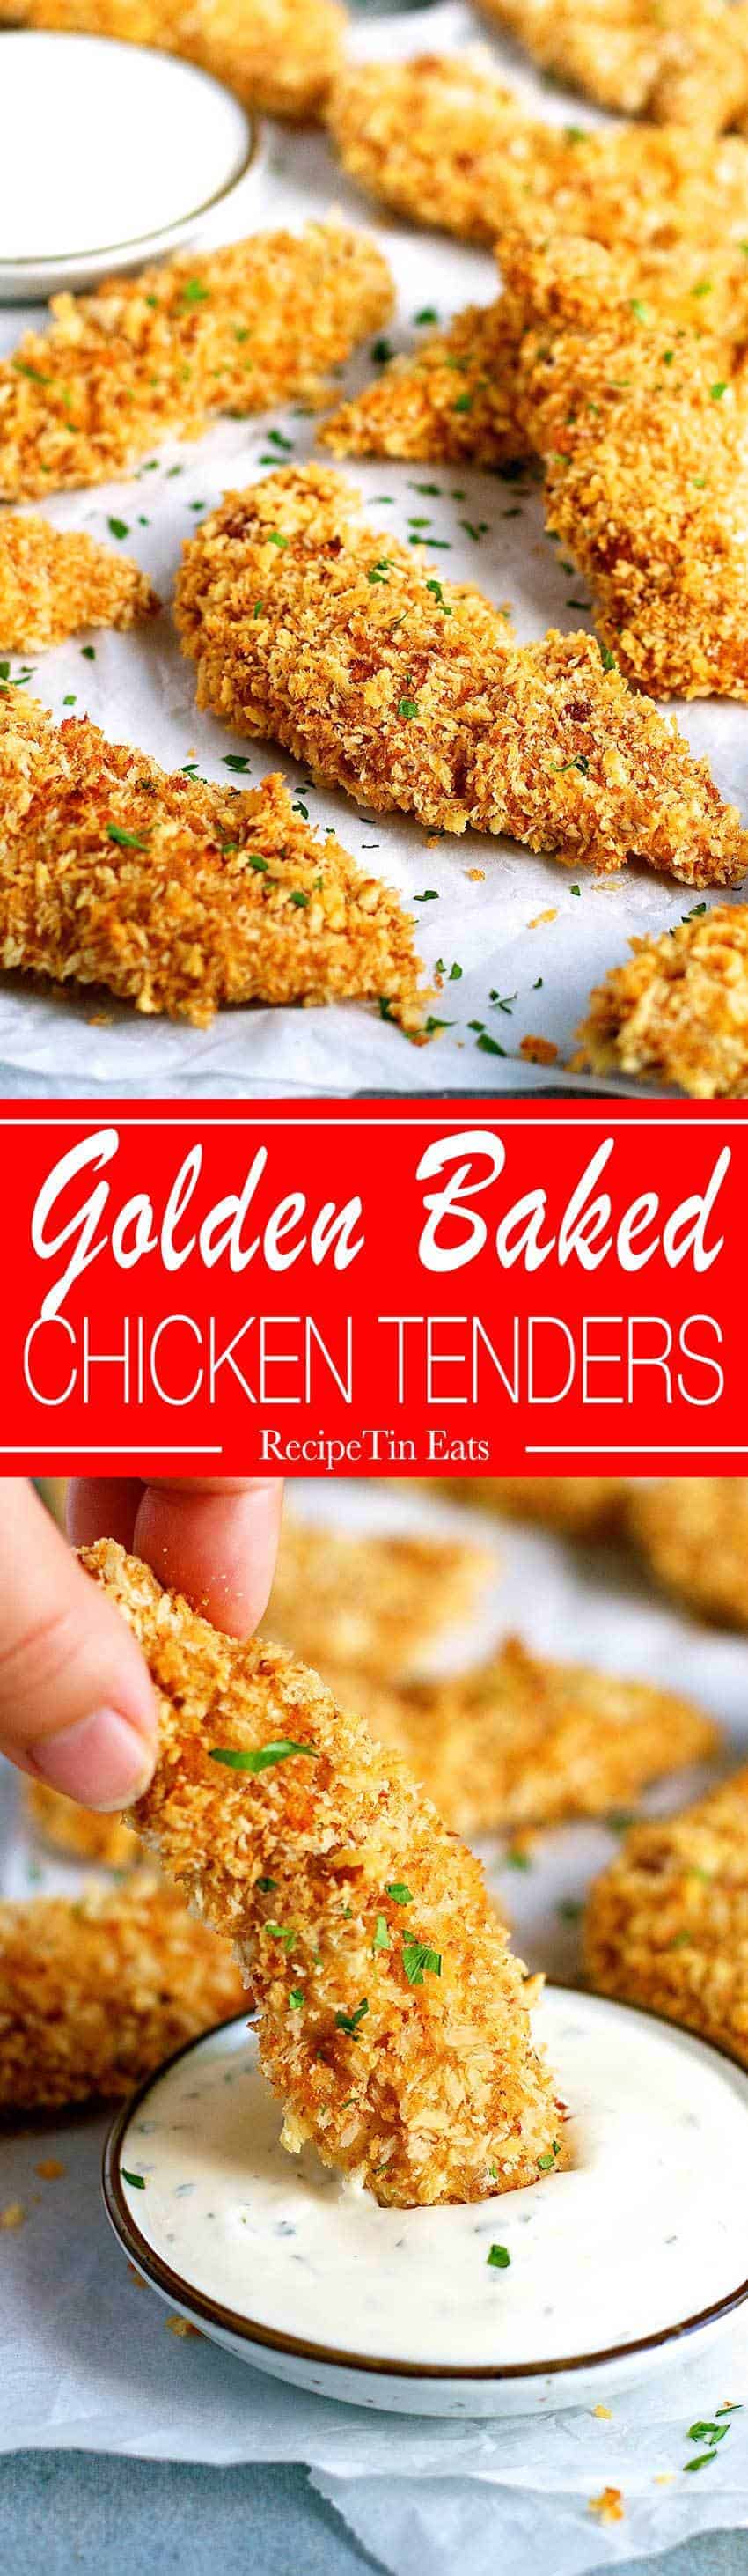 Crunchy Baked Breaded Chicken Tenders | Made this for the family the other night, INSANELY delicious!!!! And NO MESSY FINGERS!